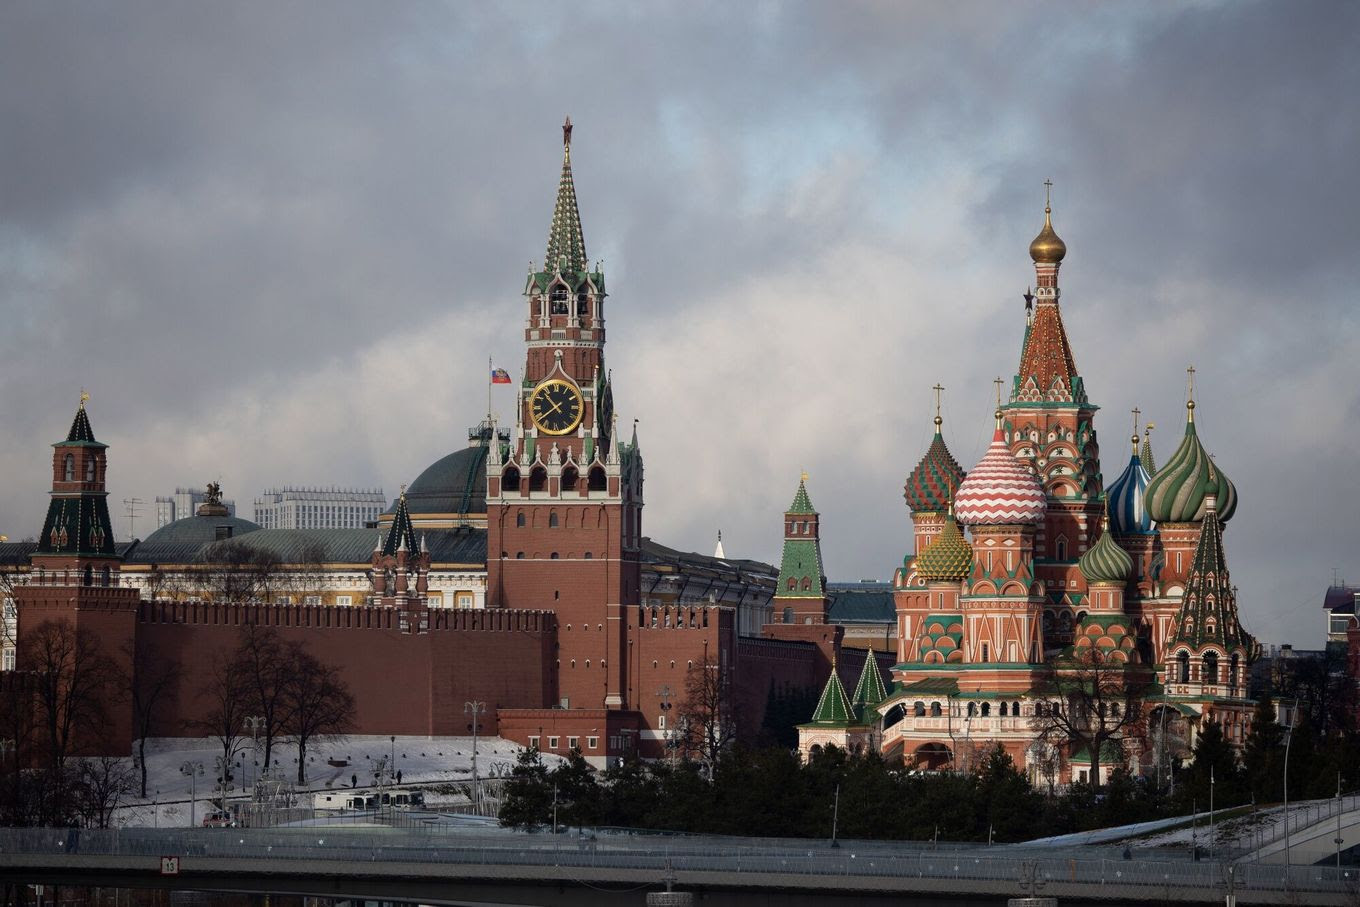 The Kremlin, center, and Saint Basil’s Cathedral in Moscow last year. (Andrey Rudakov/Bloomberg News)